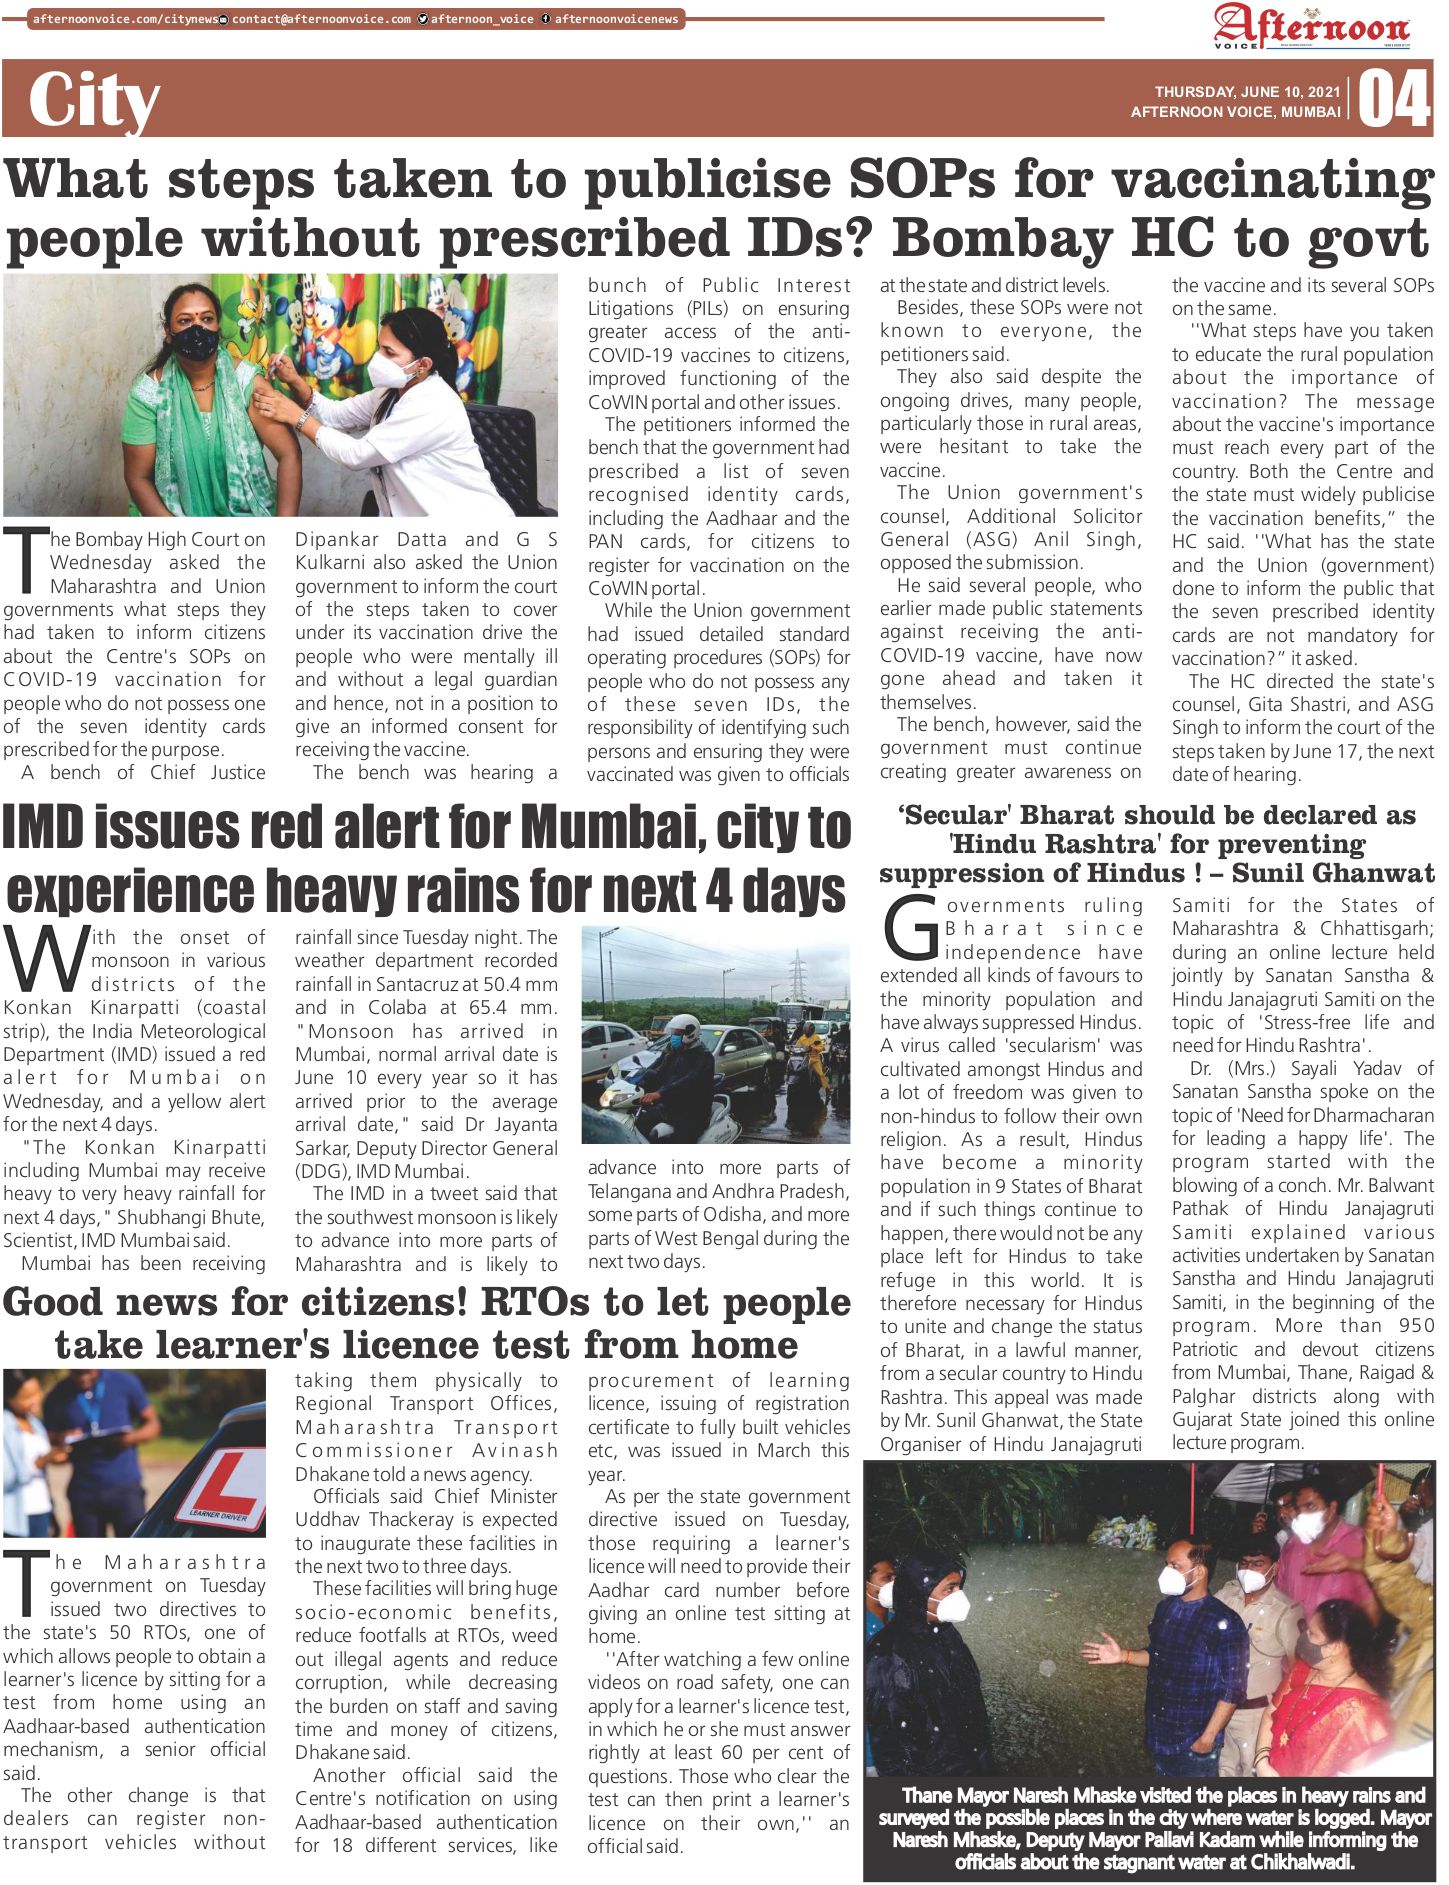 10 June 21 Page 4 Online English News Paper Daily News Epaper Today Newspaper